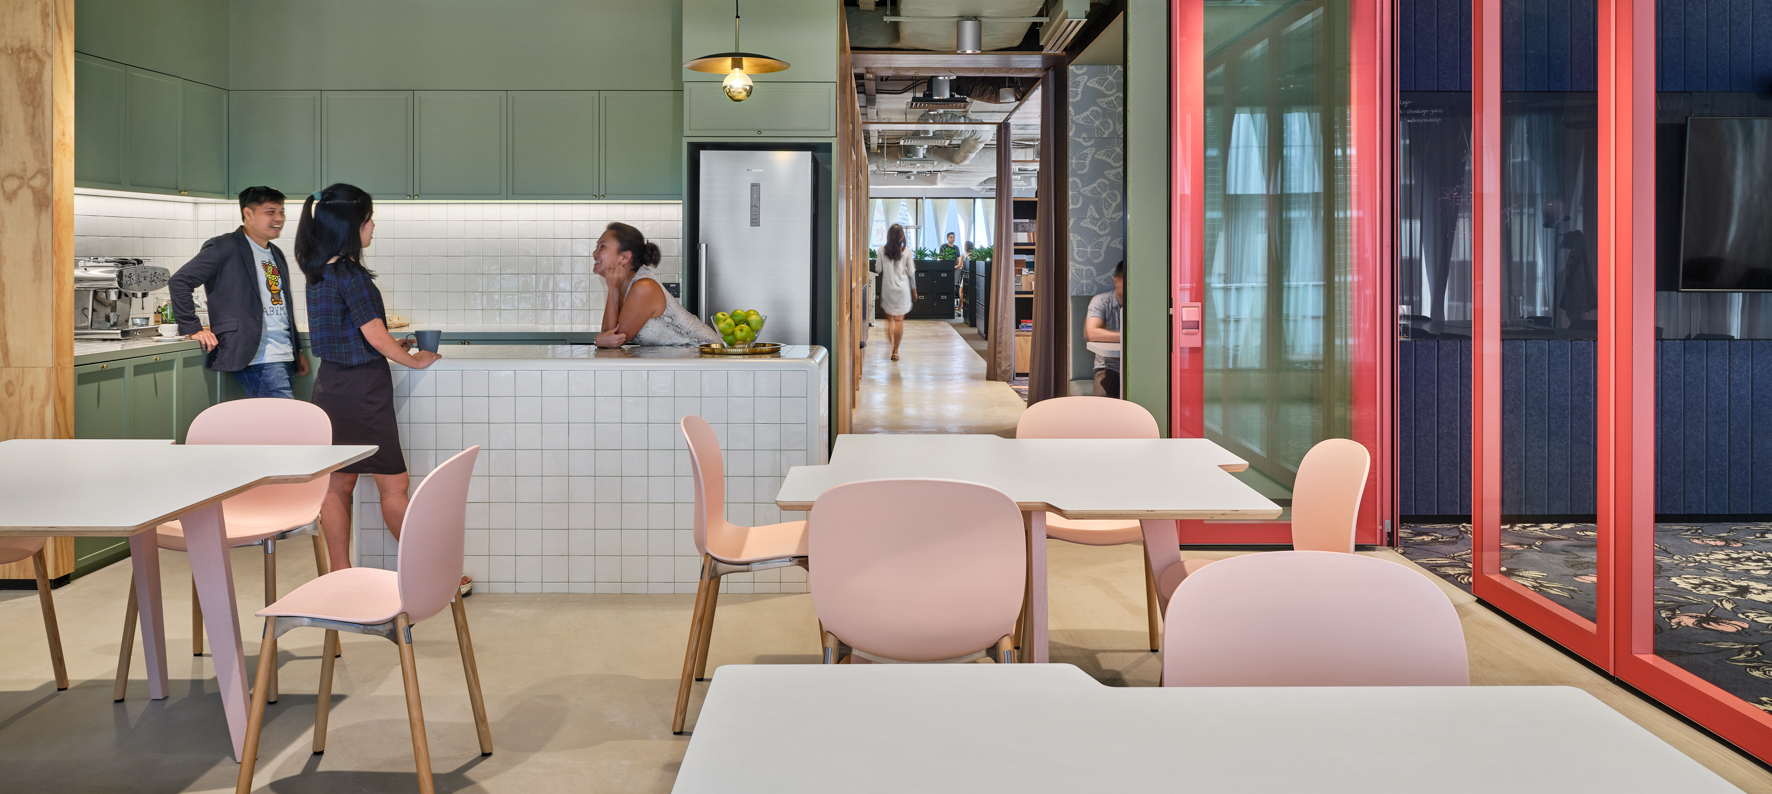 Redefining the Workplace: The New Office Interior Design